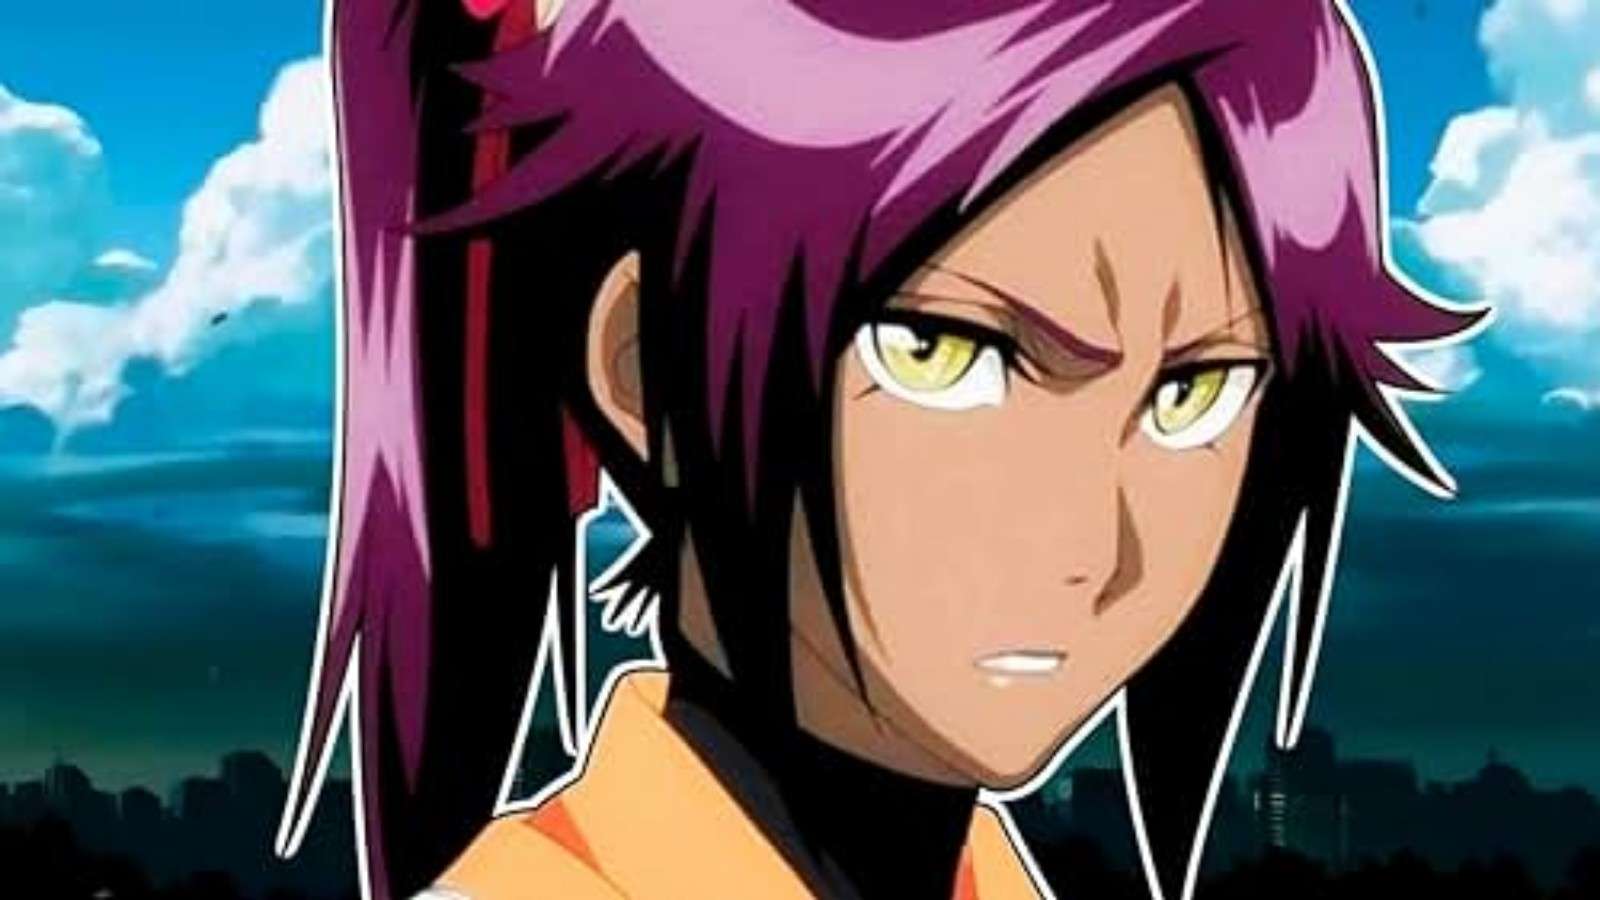 Yoruichi, an iconic character from Bleach: Thousand-Year Blood War